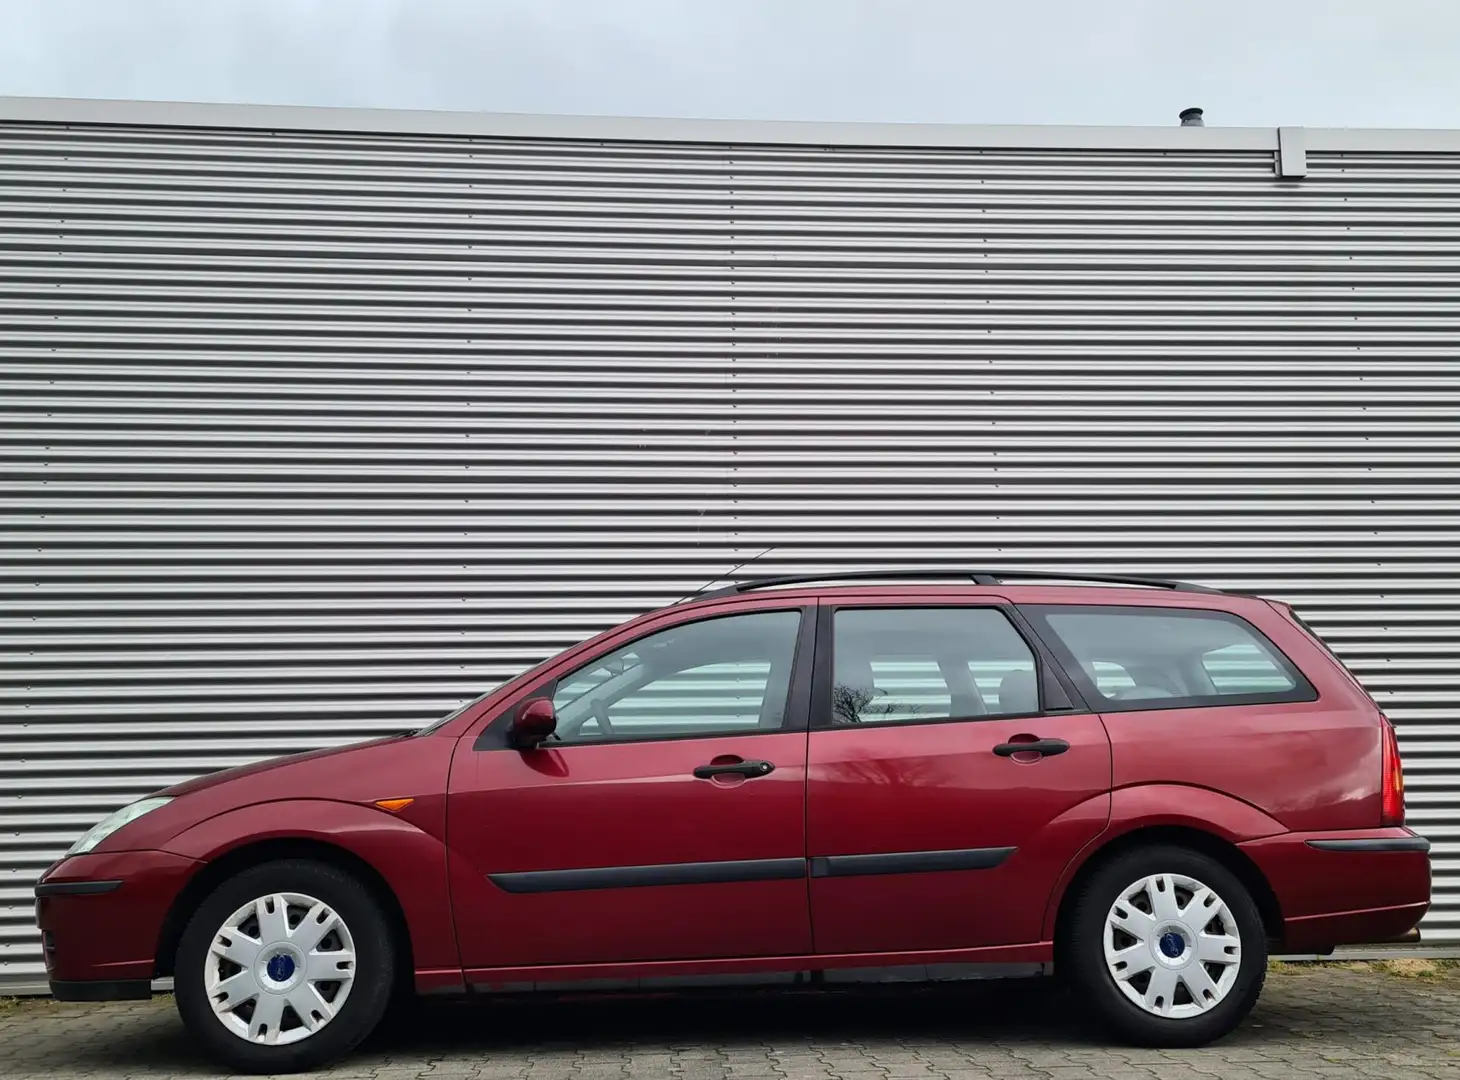 Ford Focus Wagon 1.6-16V Cool Edition 10-2002 Bordeaux Rood M crvena - 2